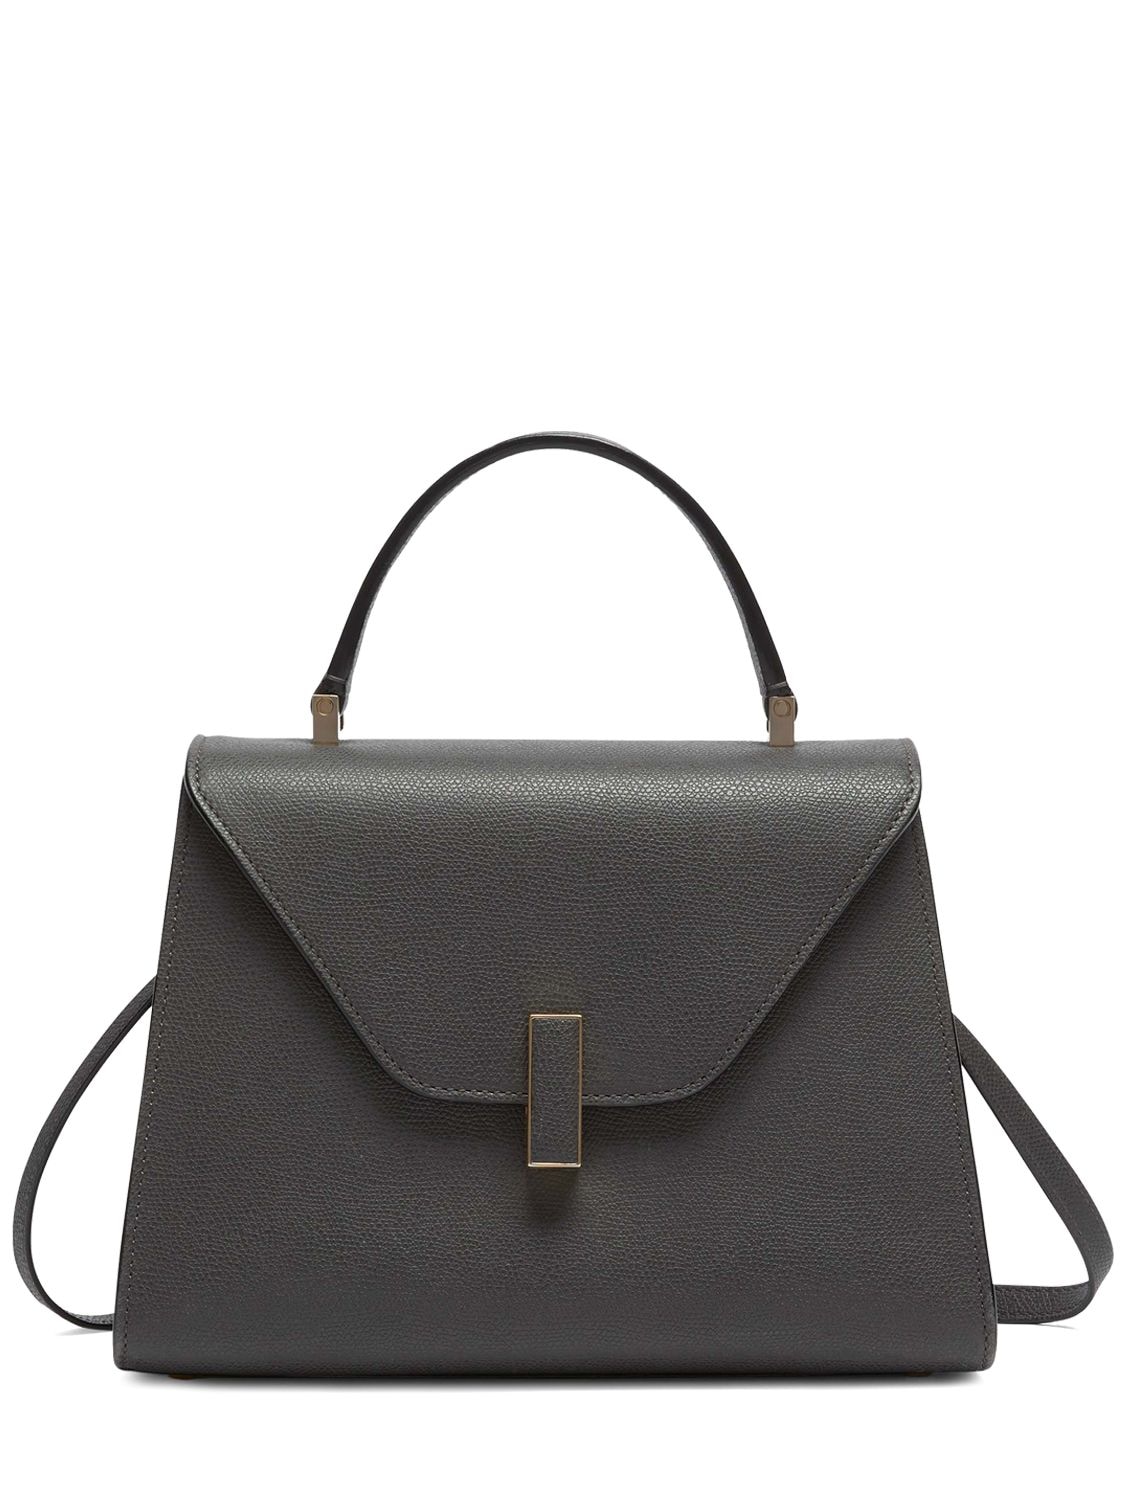 Valextra Medium Iside Soft Grained Leather Bag In Fumo Di Londra